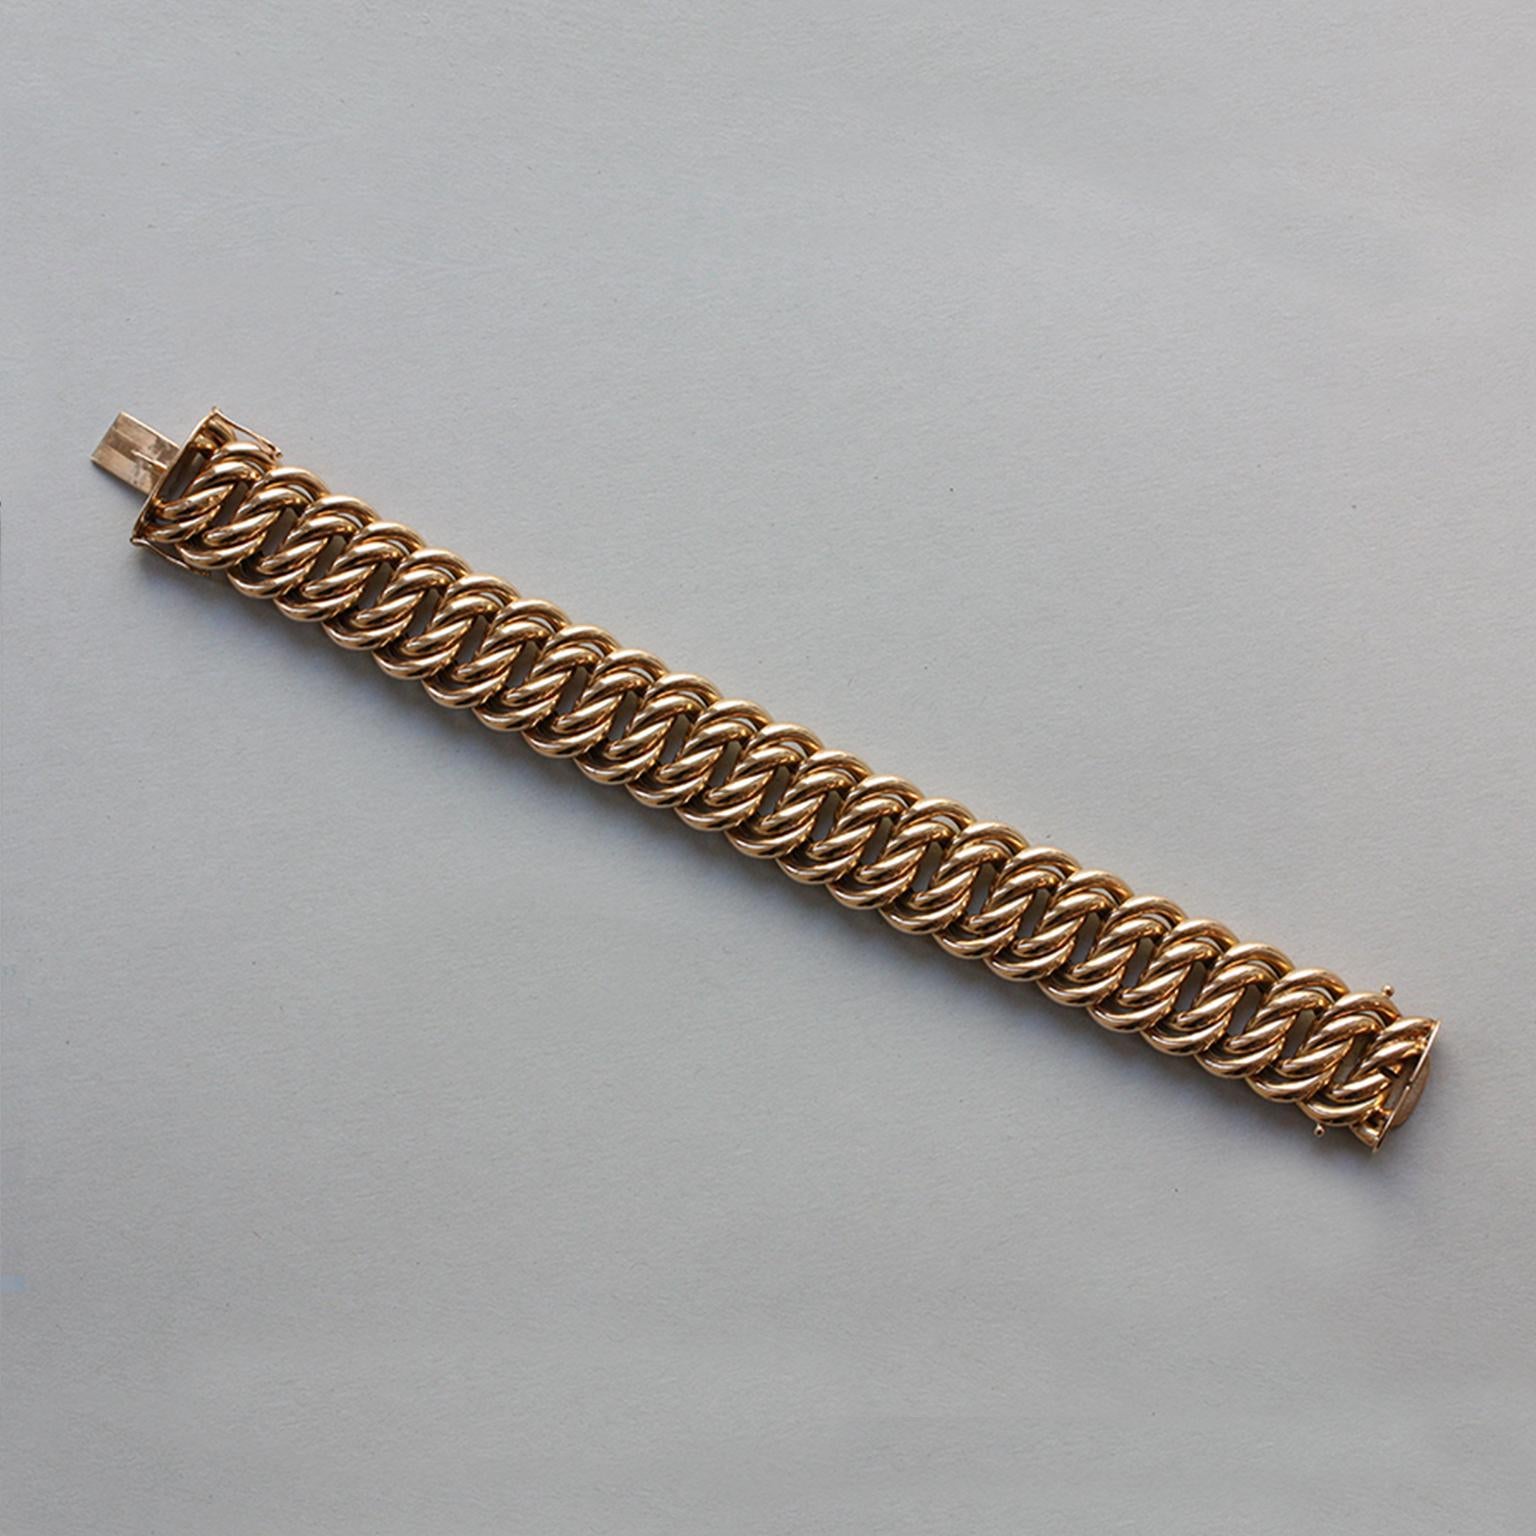 A 14 carat gold double American link bracelet.

weight: 71 grams
dimensions: 21 x 2 cm